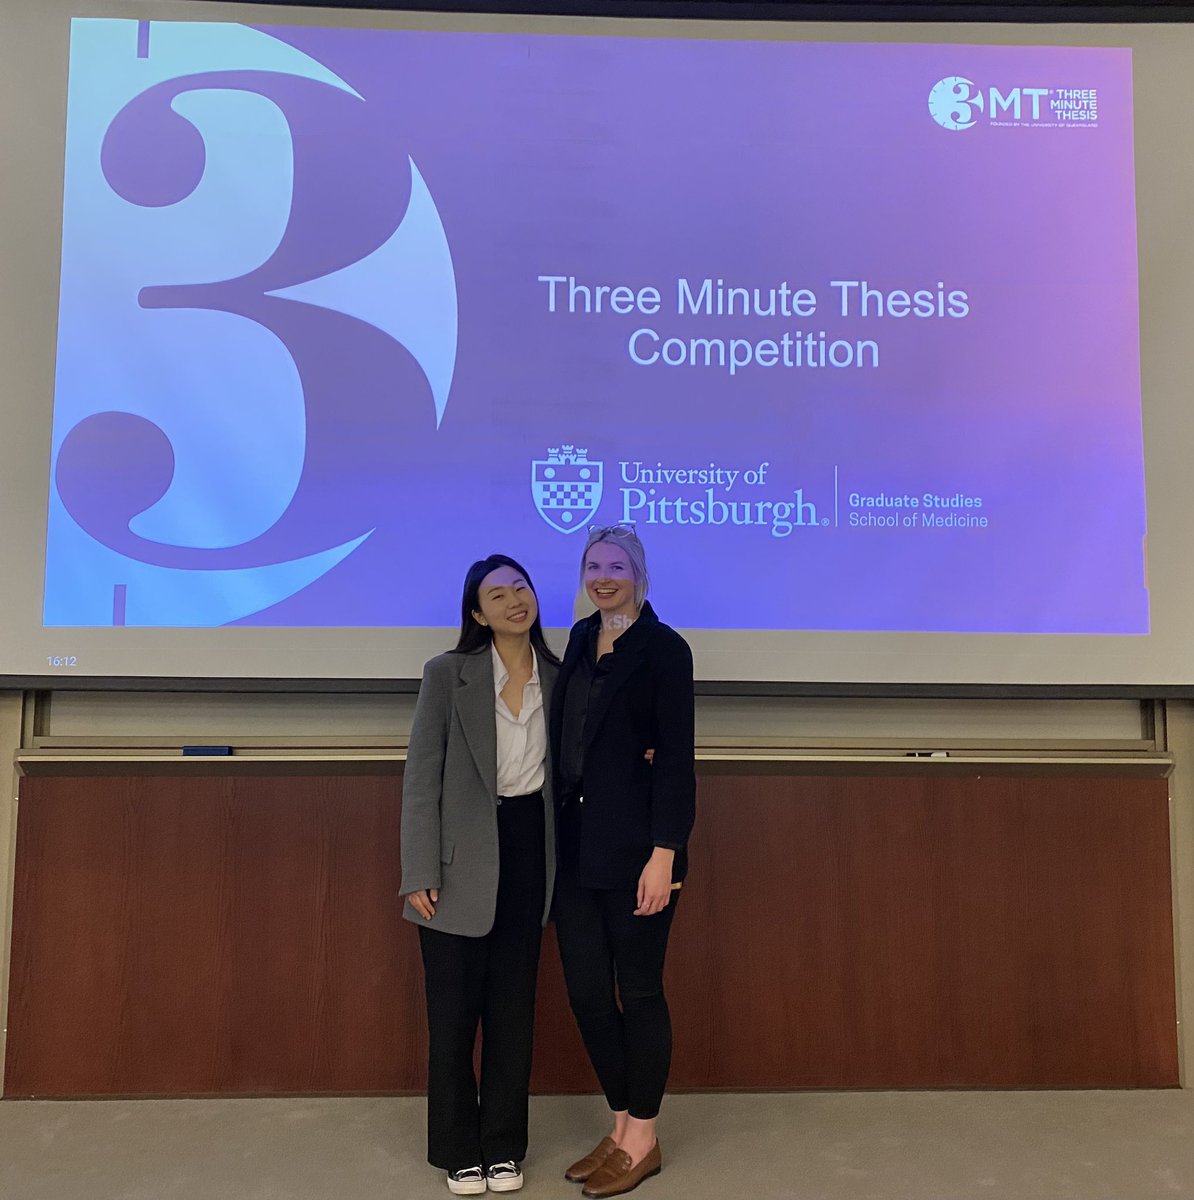 Our @Pitt_PMI students represented today for the 3 min thesis competition! @CatMPhelps @HyeMiKim0314 took home first place in the competition (Catherine from @MeiselLab) and people’s choice award (Hye Mi from Bruno Lab). Way to go! #WomenInScience